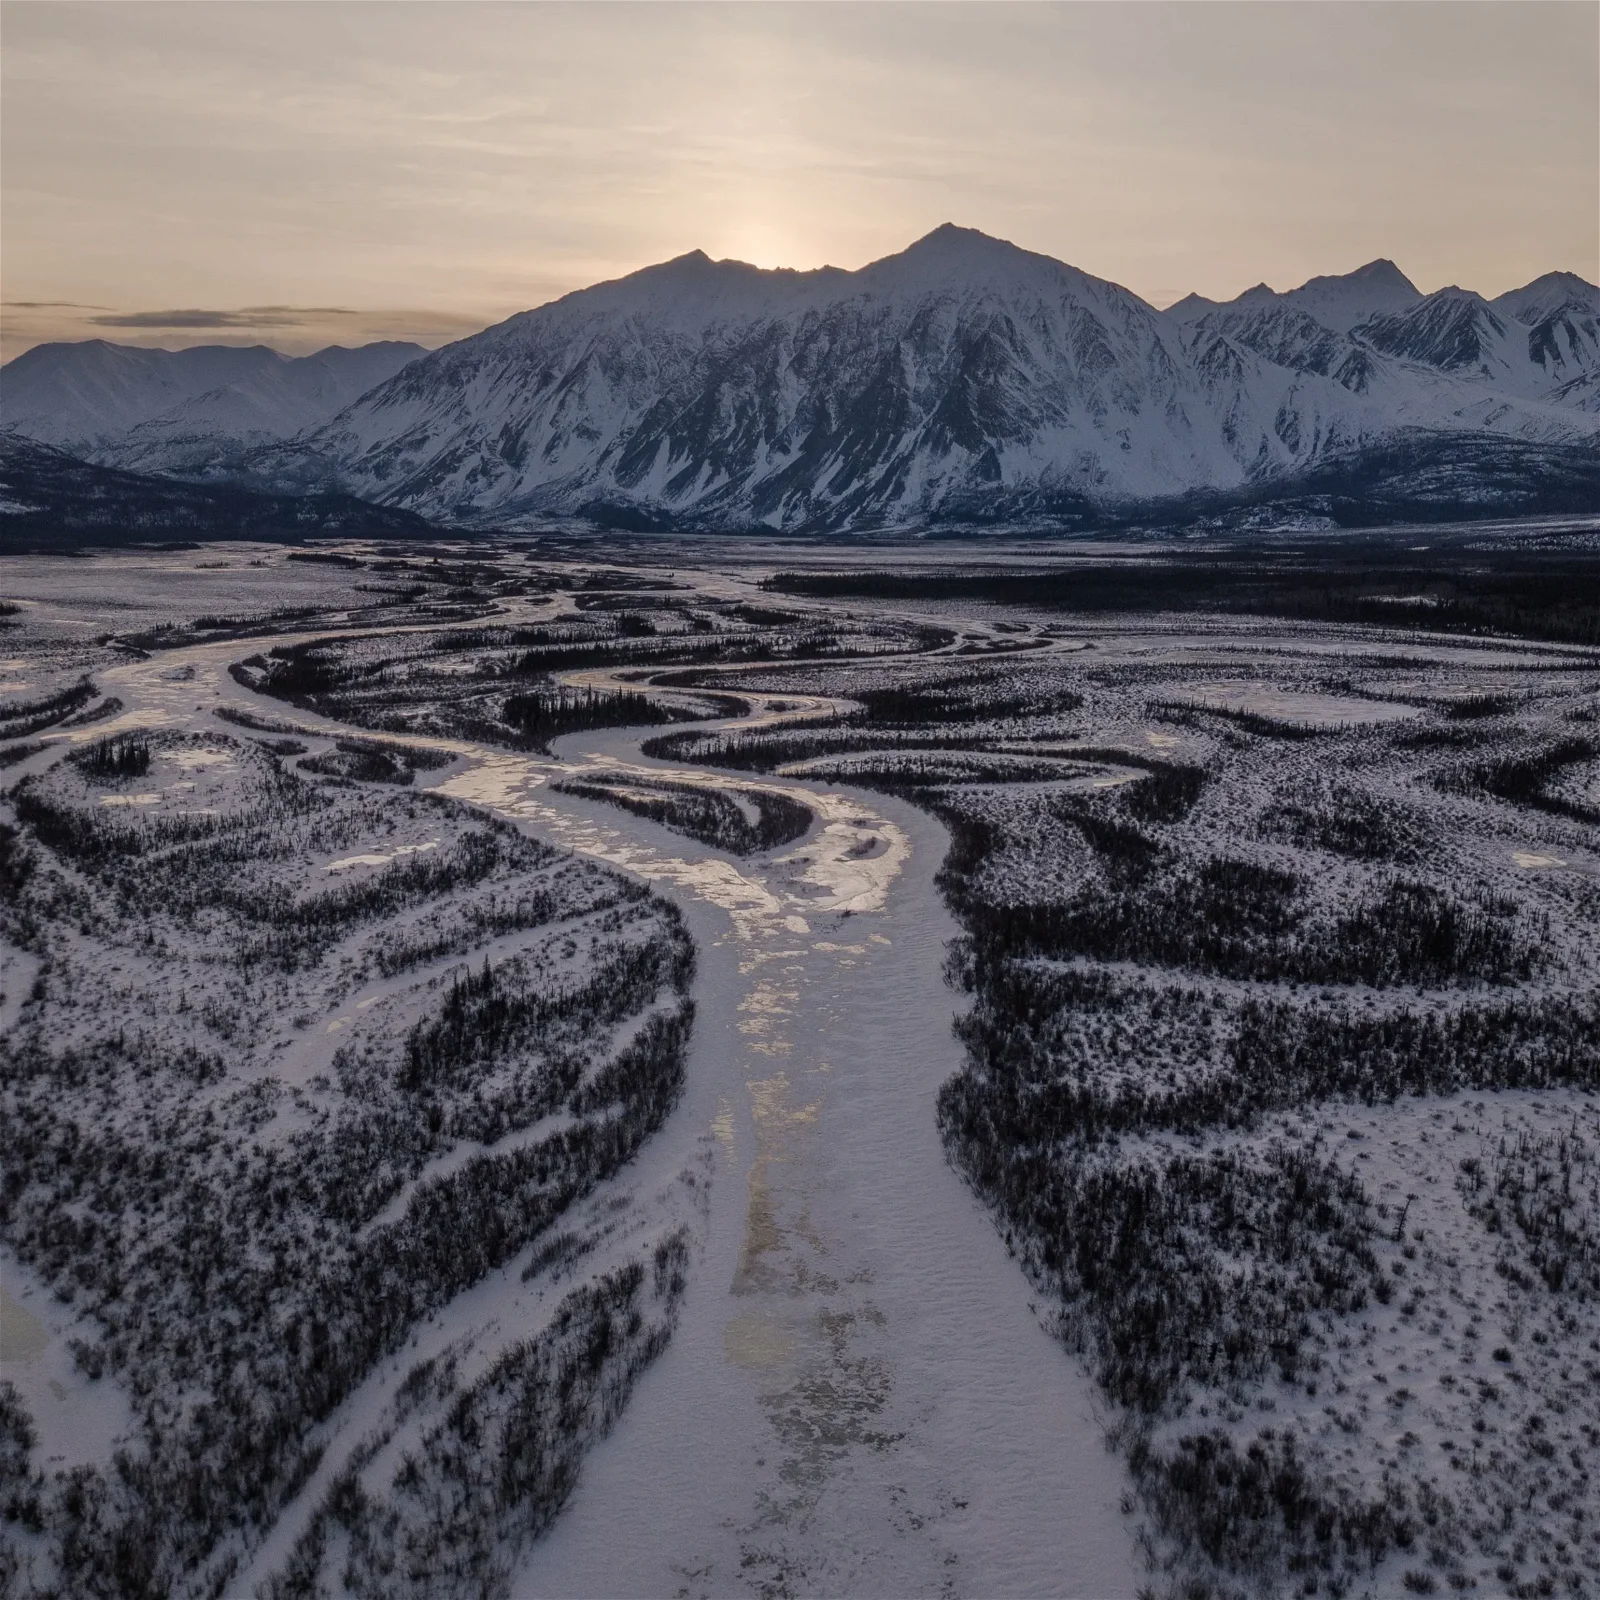 Scenic Winding Roads in Yukon's Forest with Majestic Mountains in the Background